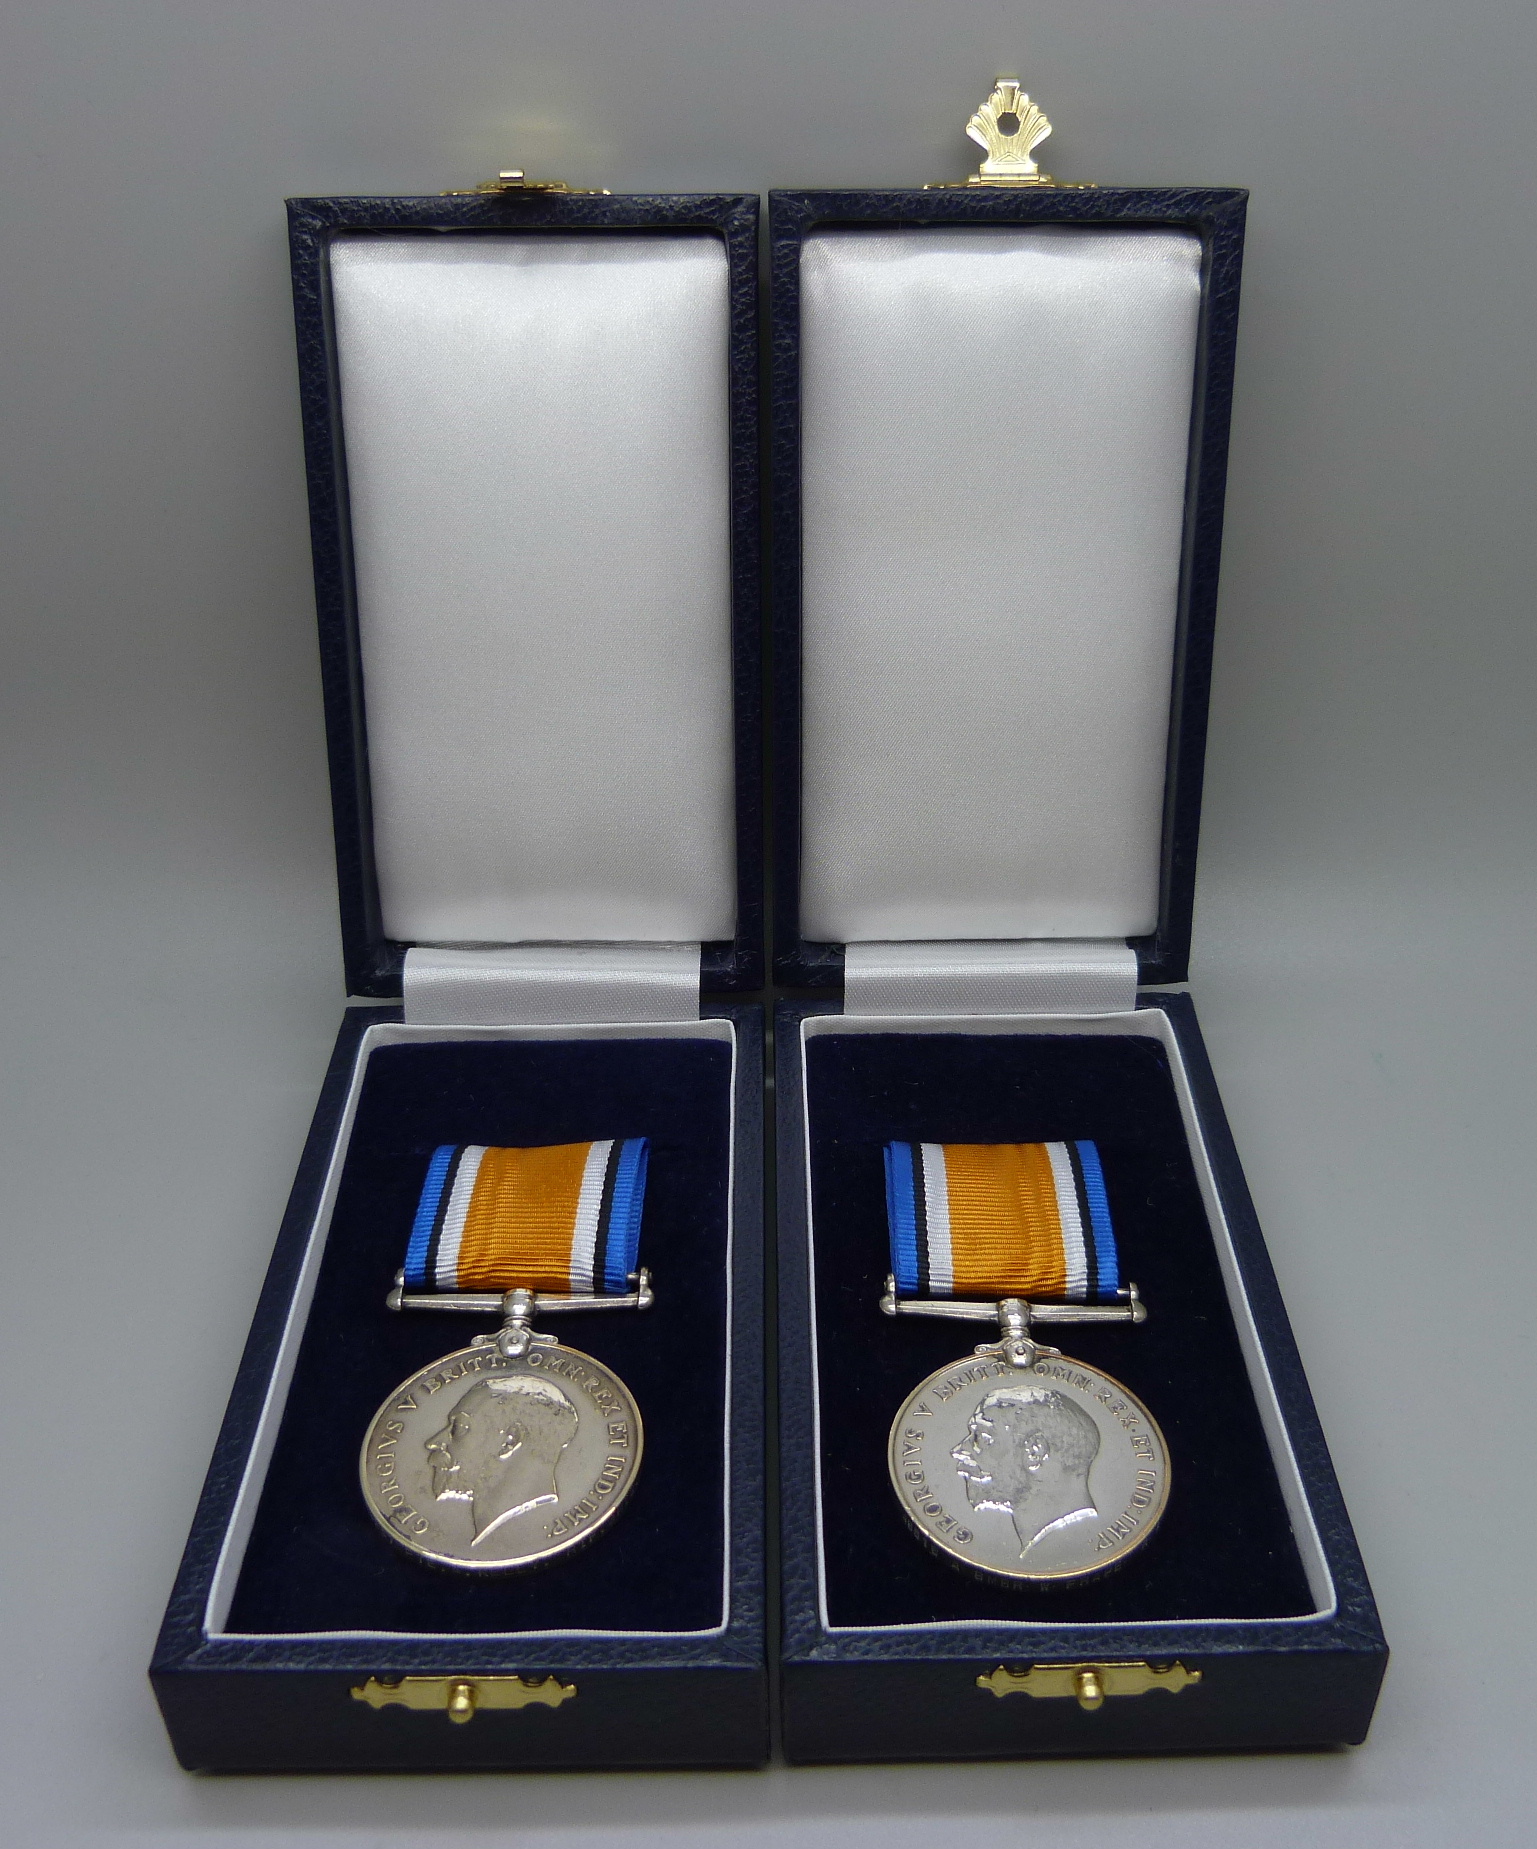 Two WWI medals: 46516 Walter Frape, Acting Bombardier Royal Artillery and S-34257 Private A.